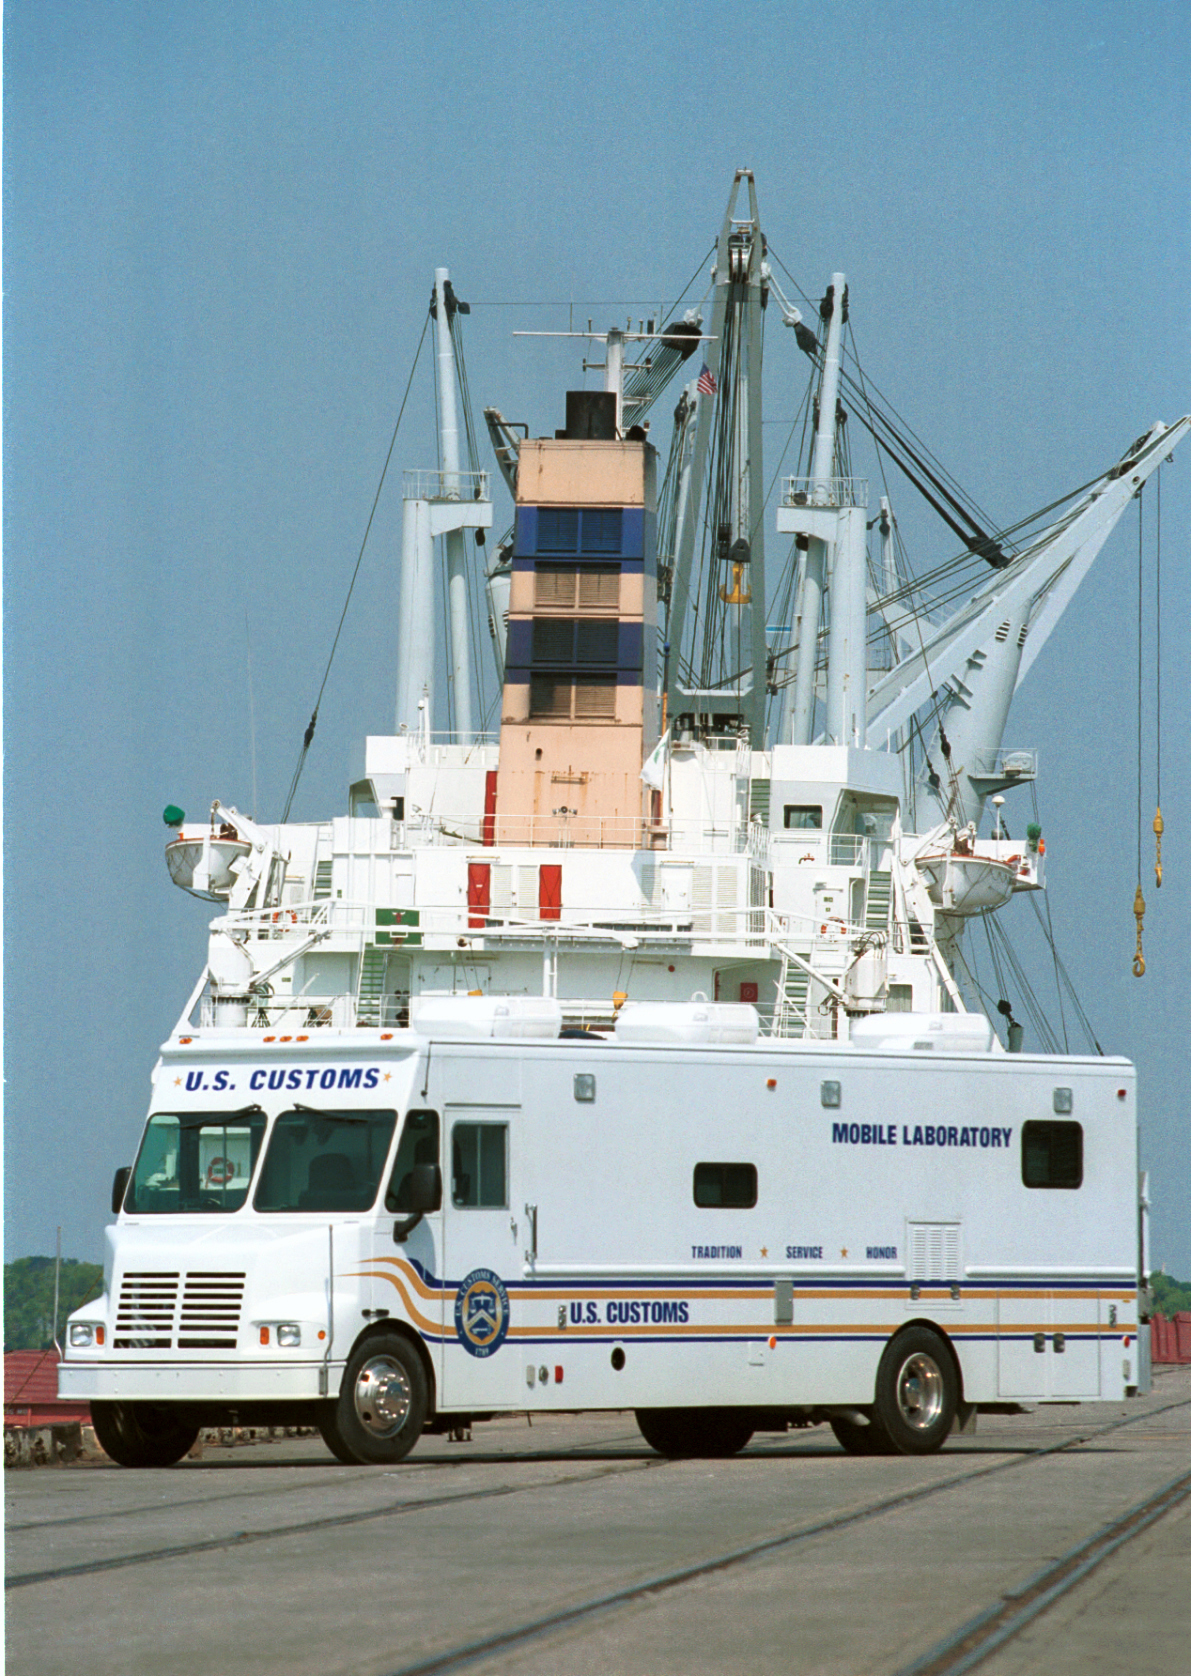 CBP can use a mobile laboratory when needed at port of entries around the U.S.